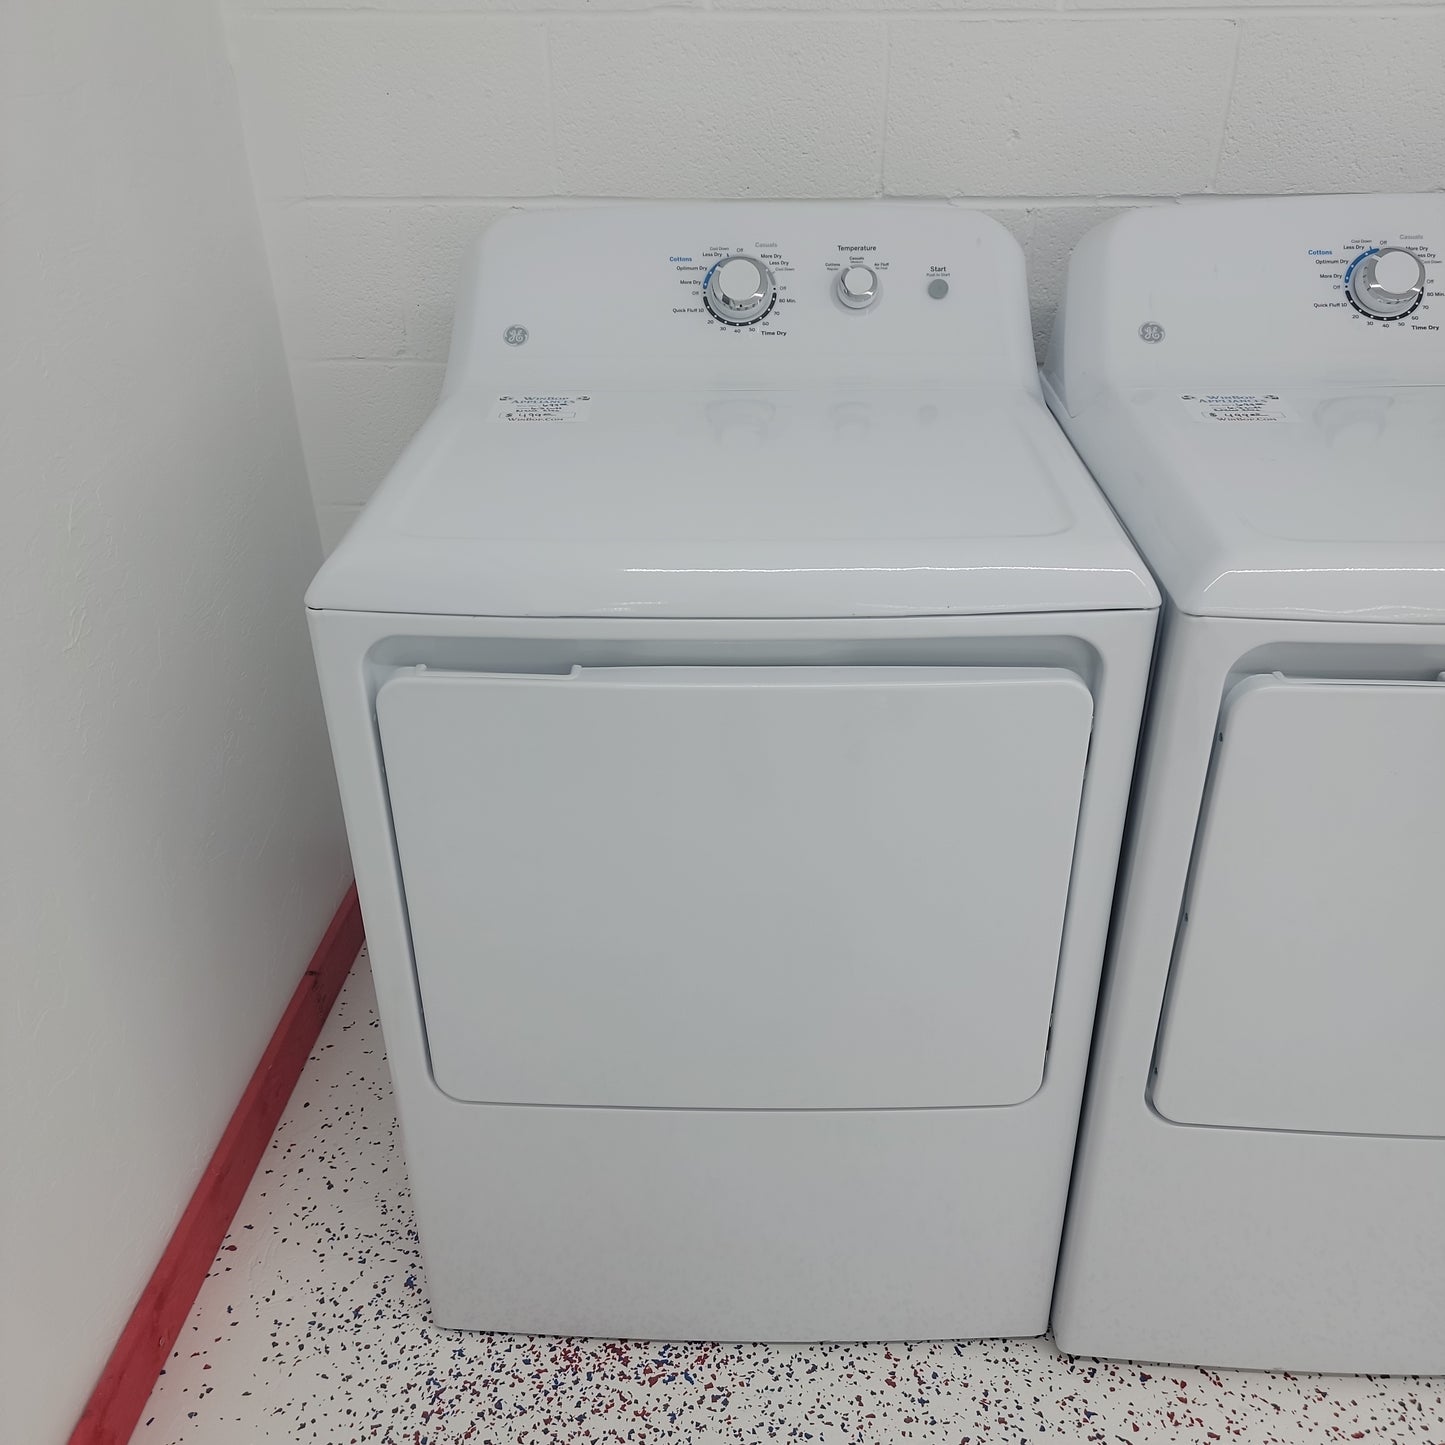 New GE 7.2 Cubic ft Electric Dryer